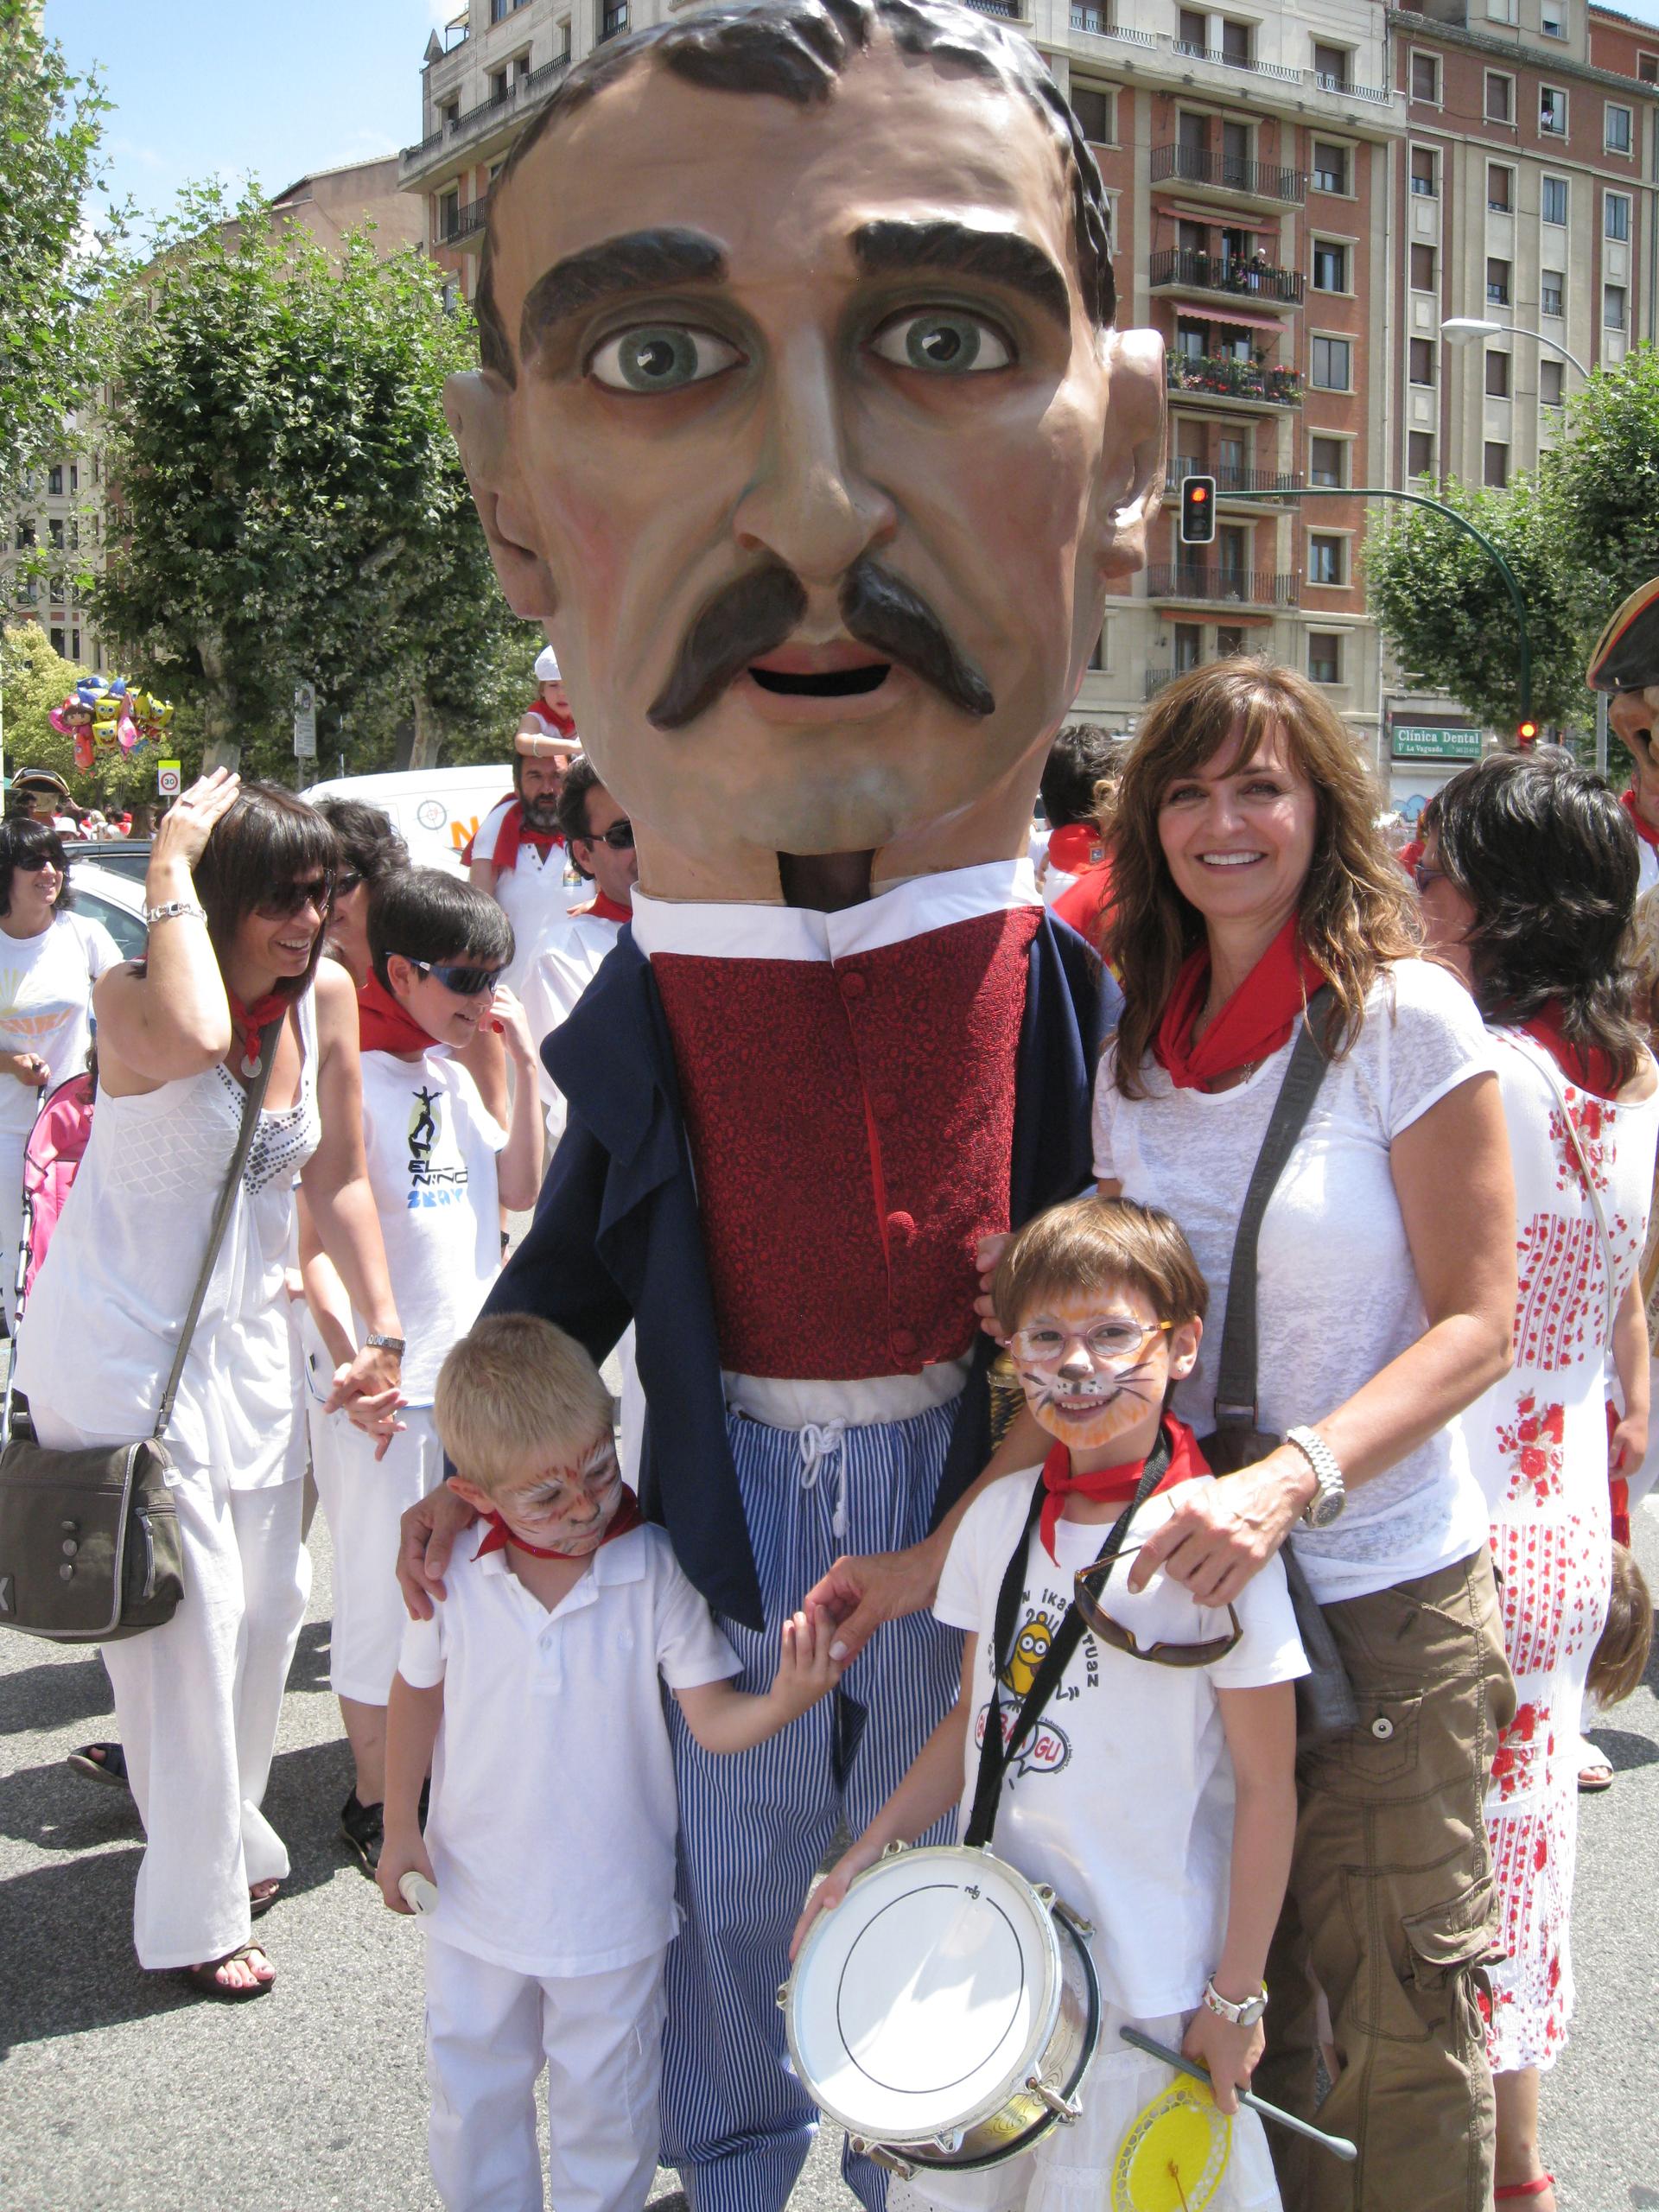 Woman at festival posing with children with a man in costume